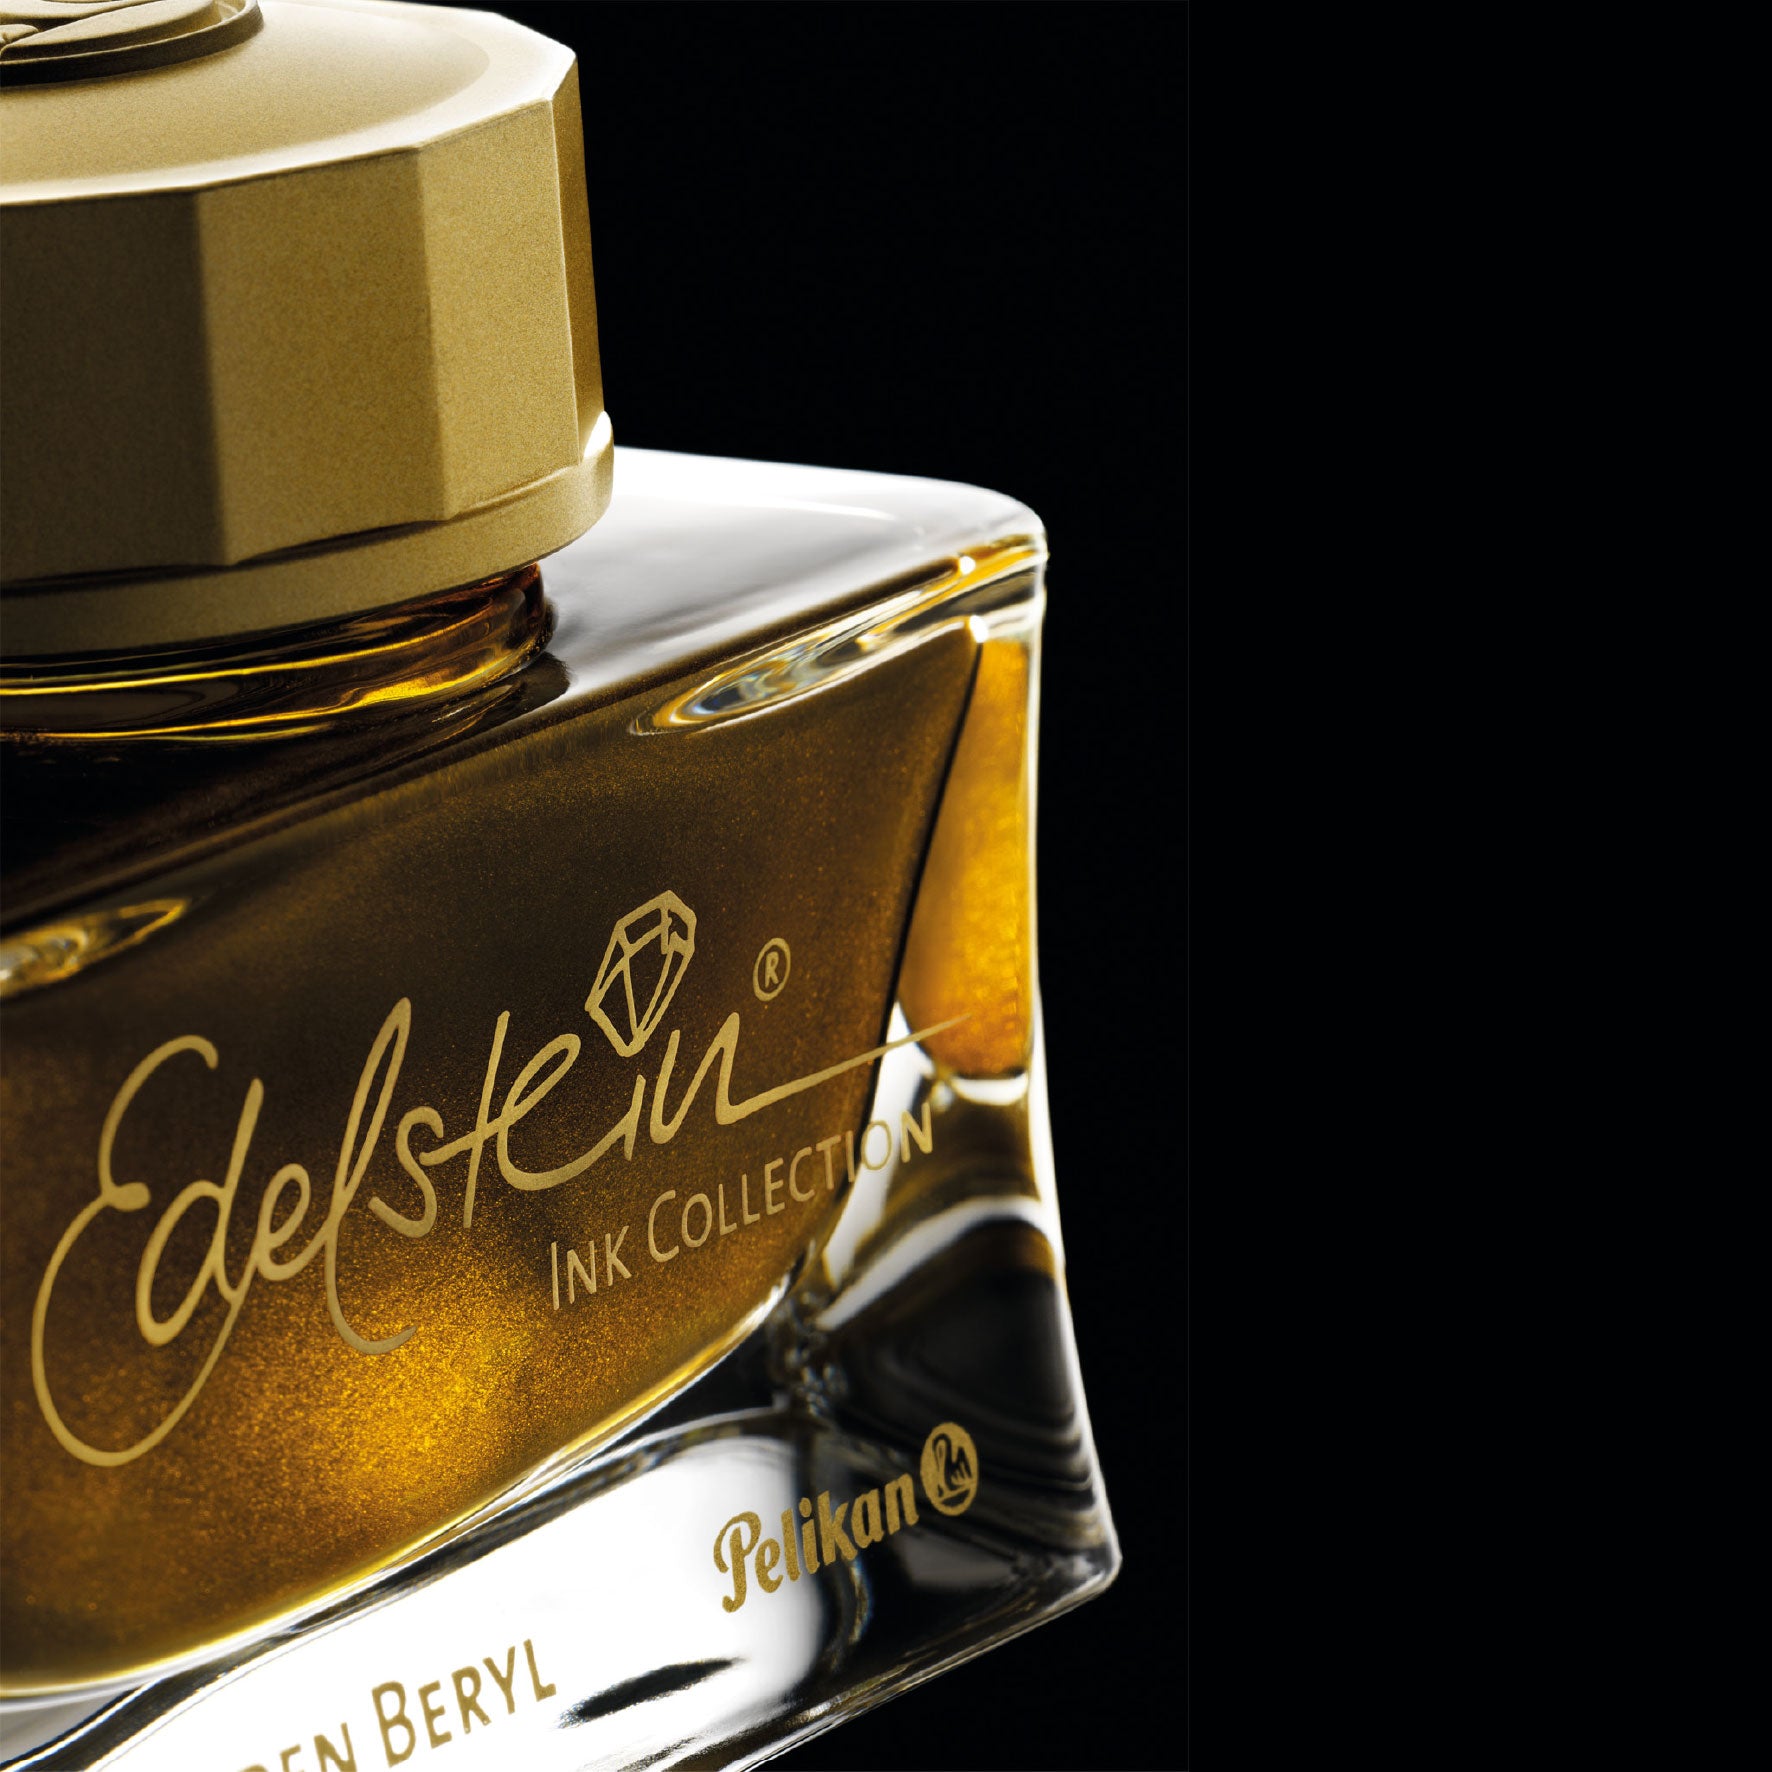 Pelikan - Edelstein Ink - Golden Beryl - Ink of the Year 2021 (Limited Edition) <Outgoing>